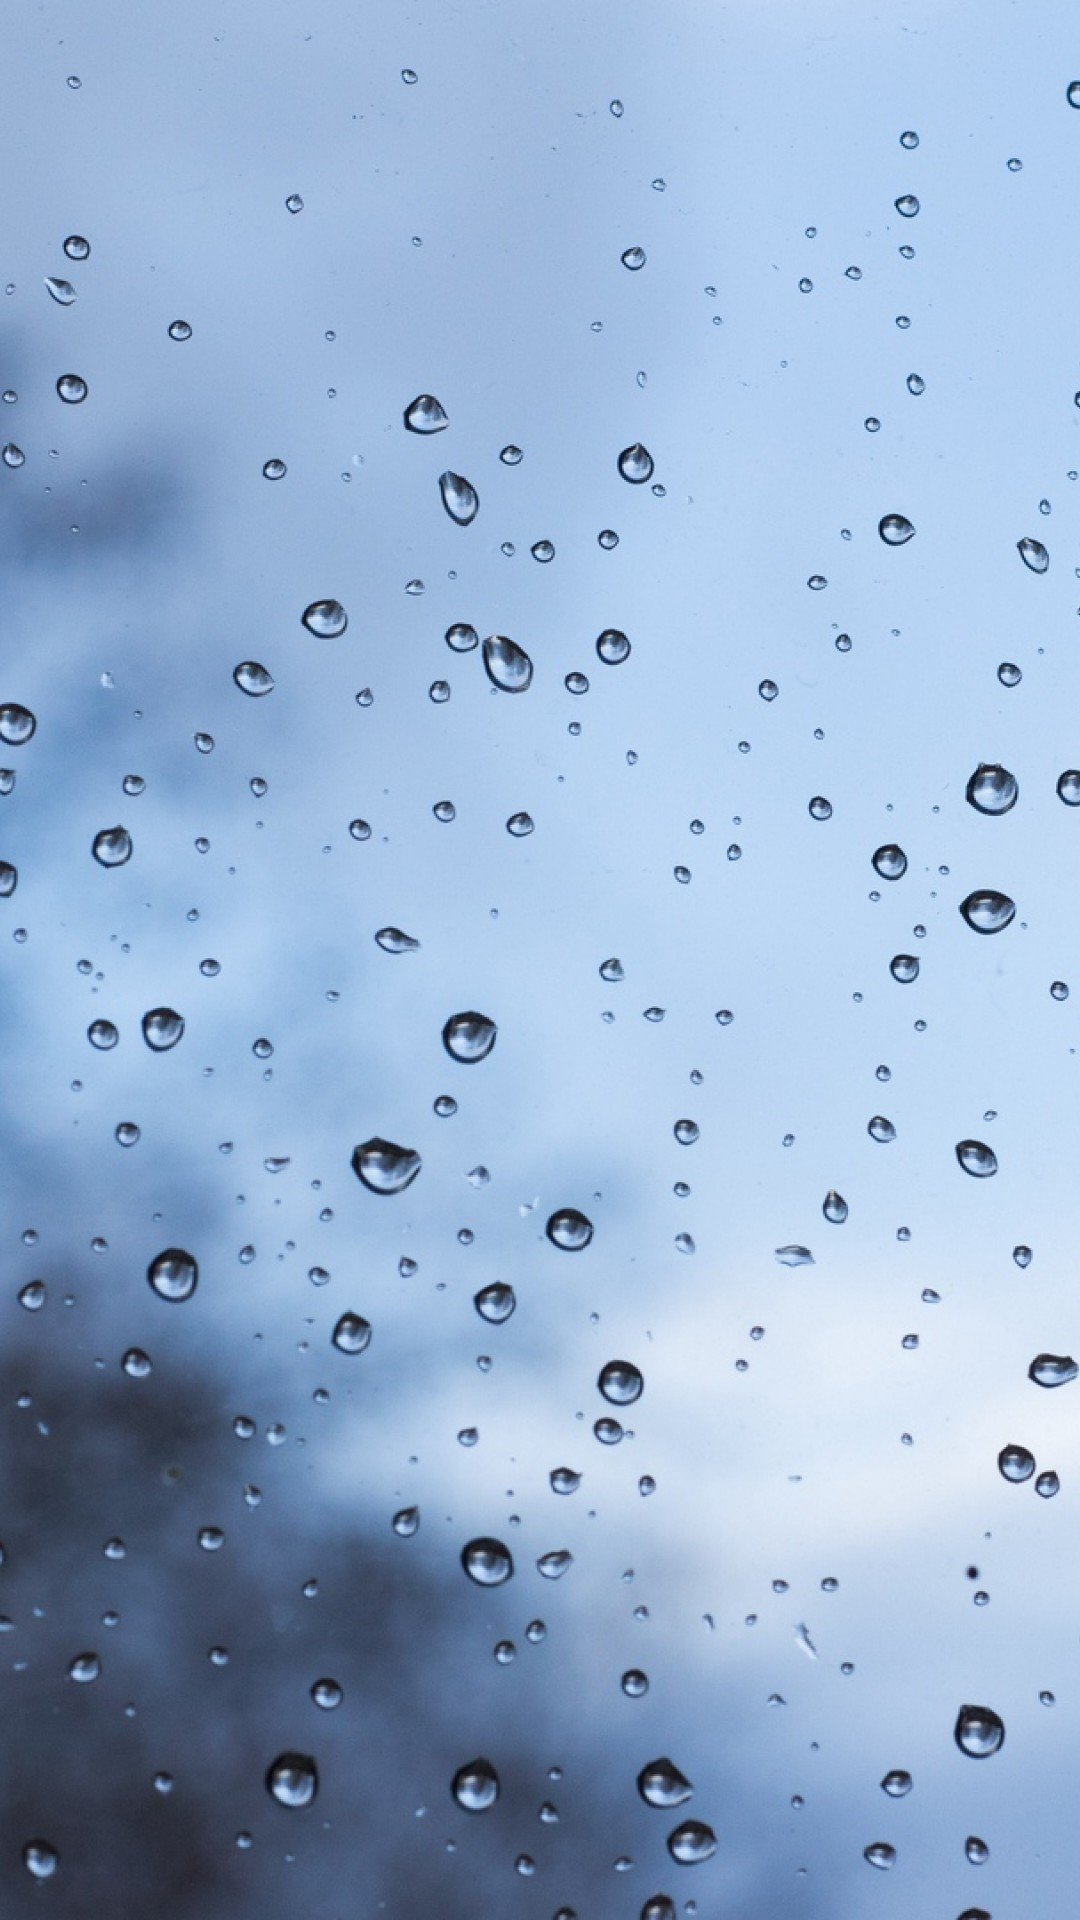 Rain cool wallpapers for iPhone 6